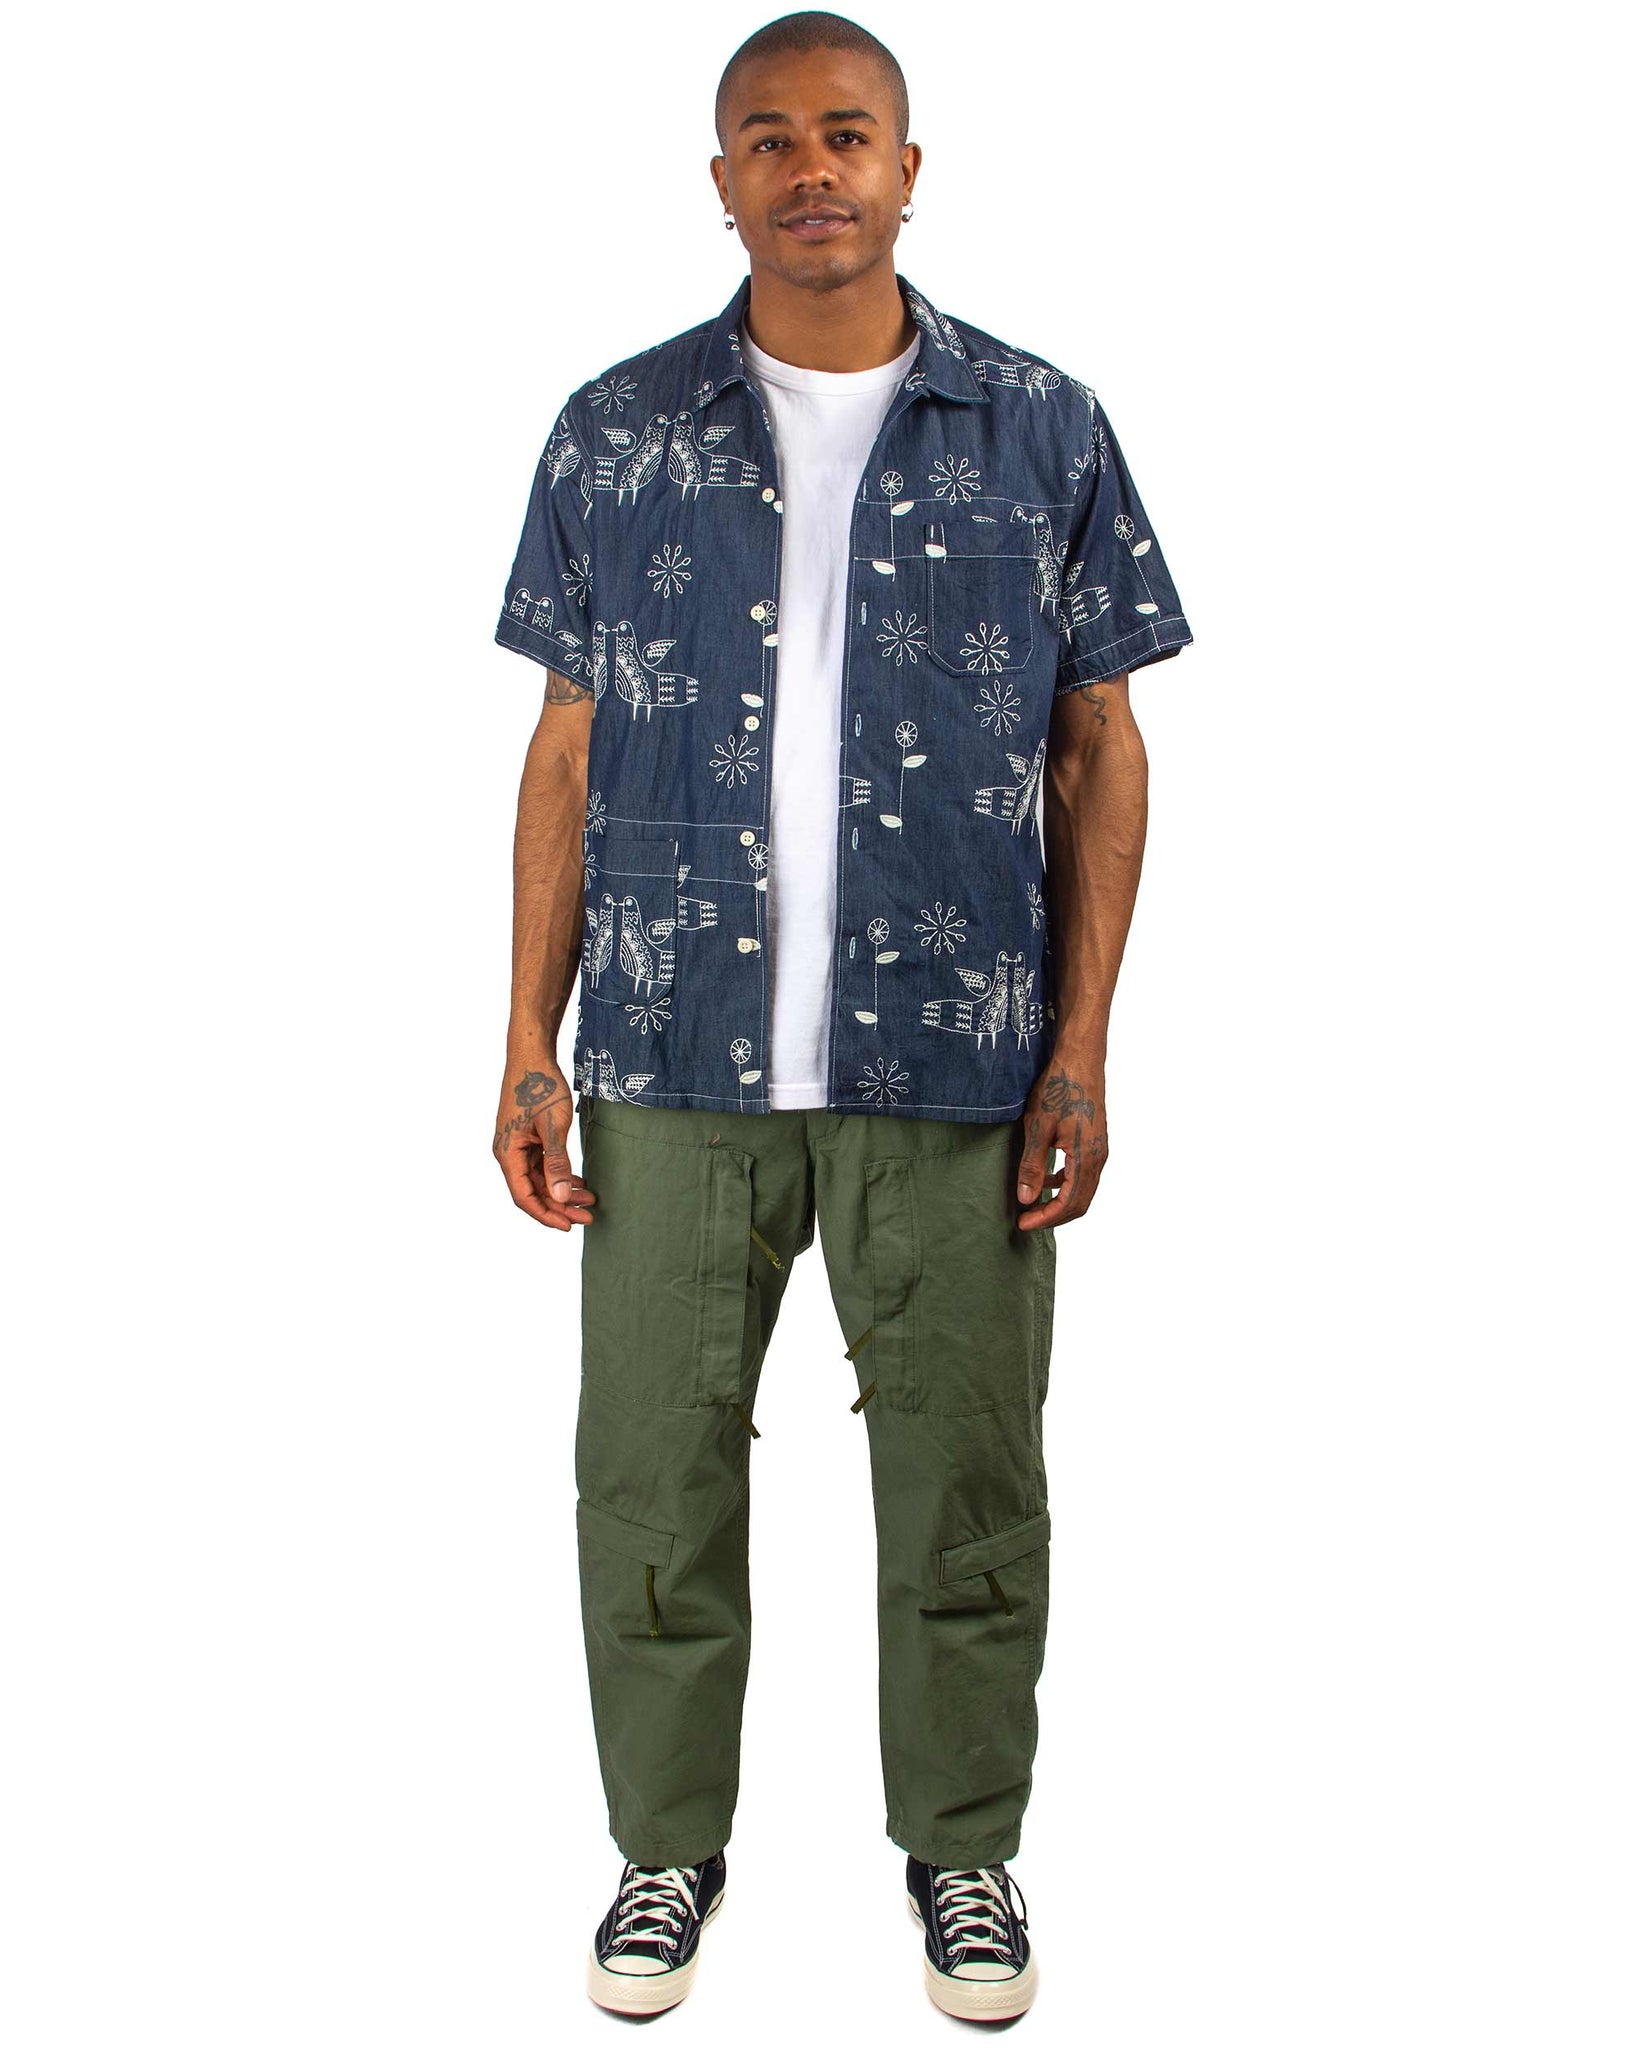 Engineered Garments Aircrew Pant Olive Cotton Ripstop Model